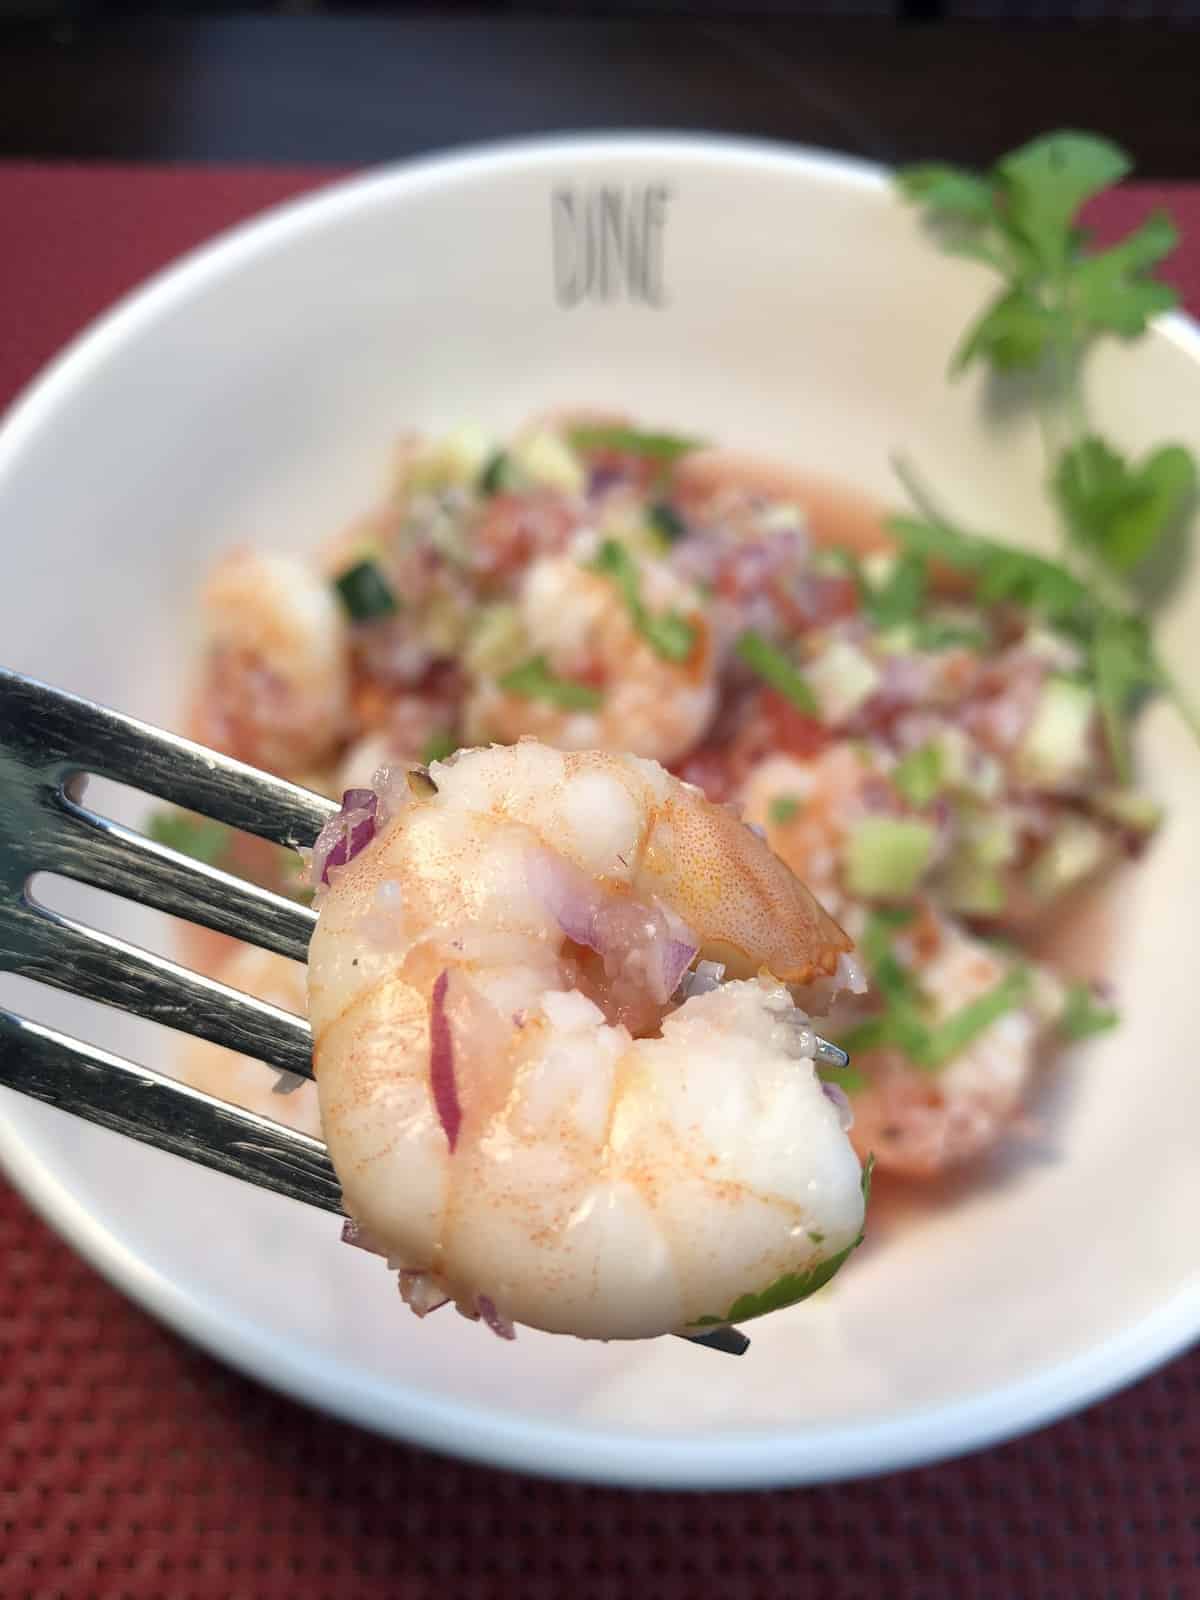 A bite of Shrimp Ceviche on a fork over a white bowl containing homemade shrimp ceviche